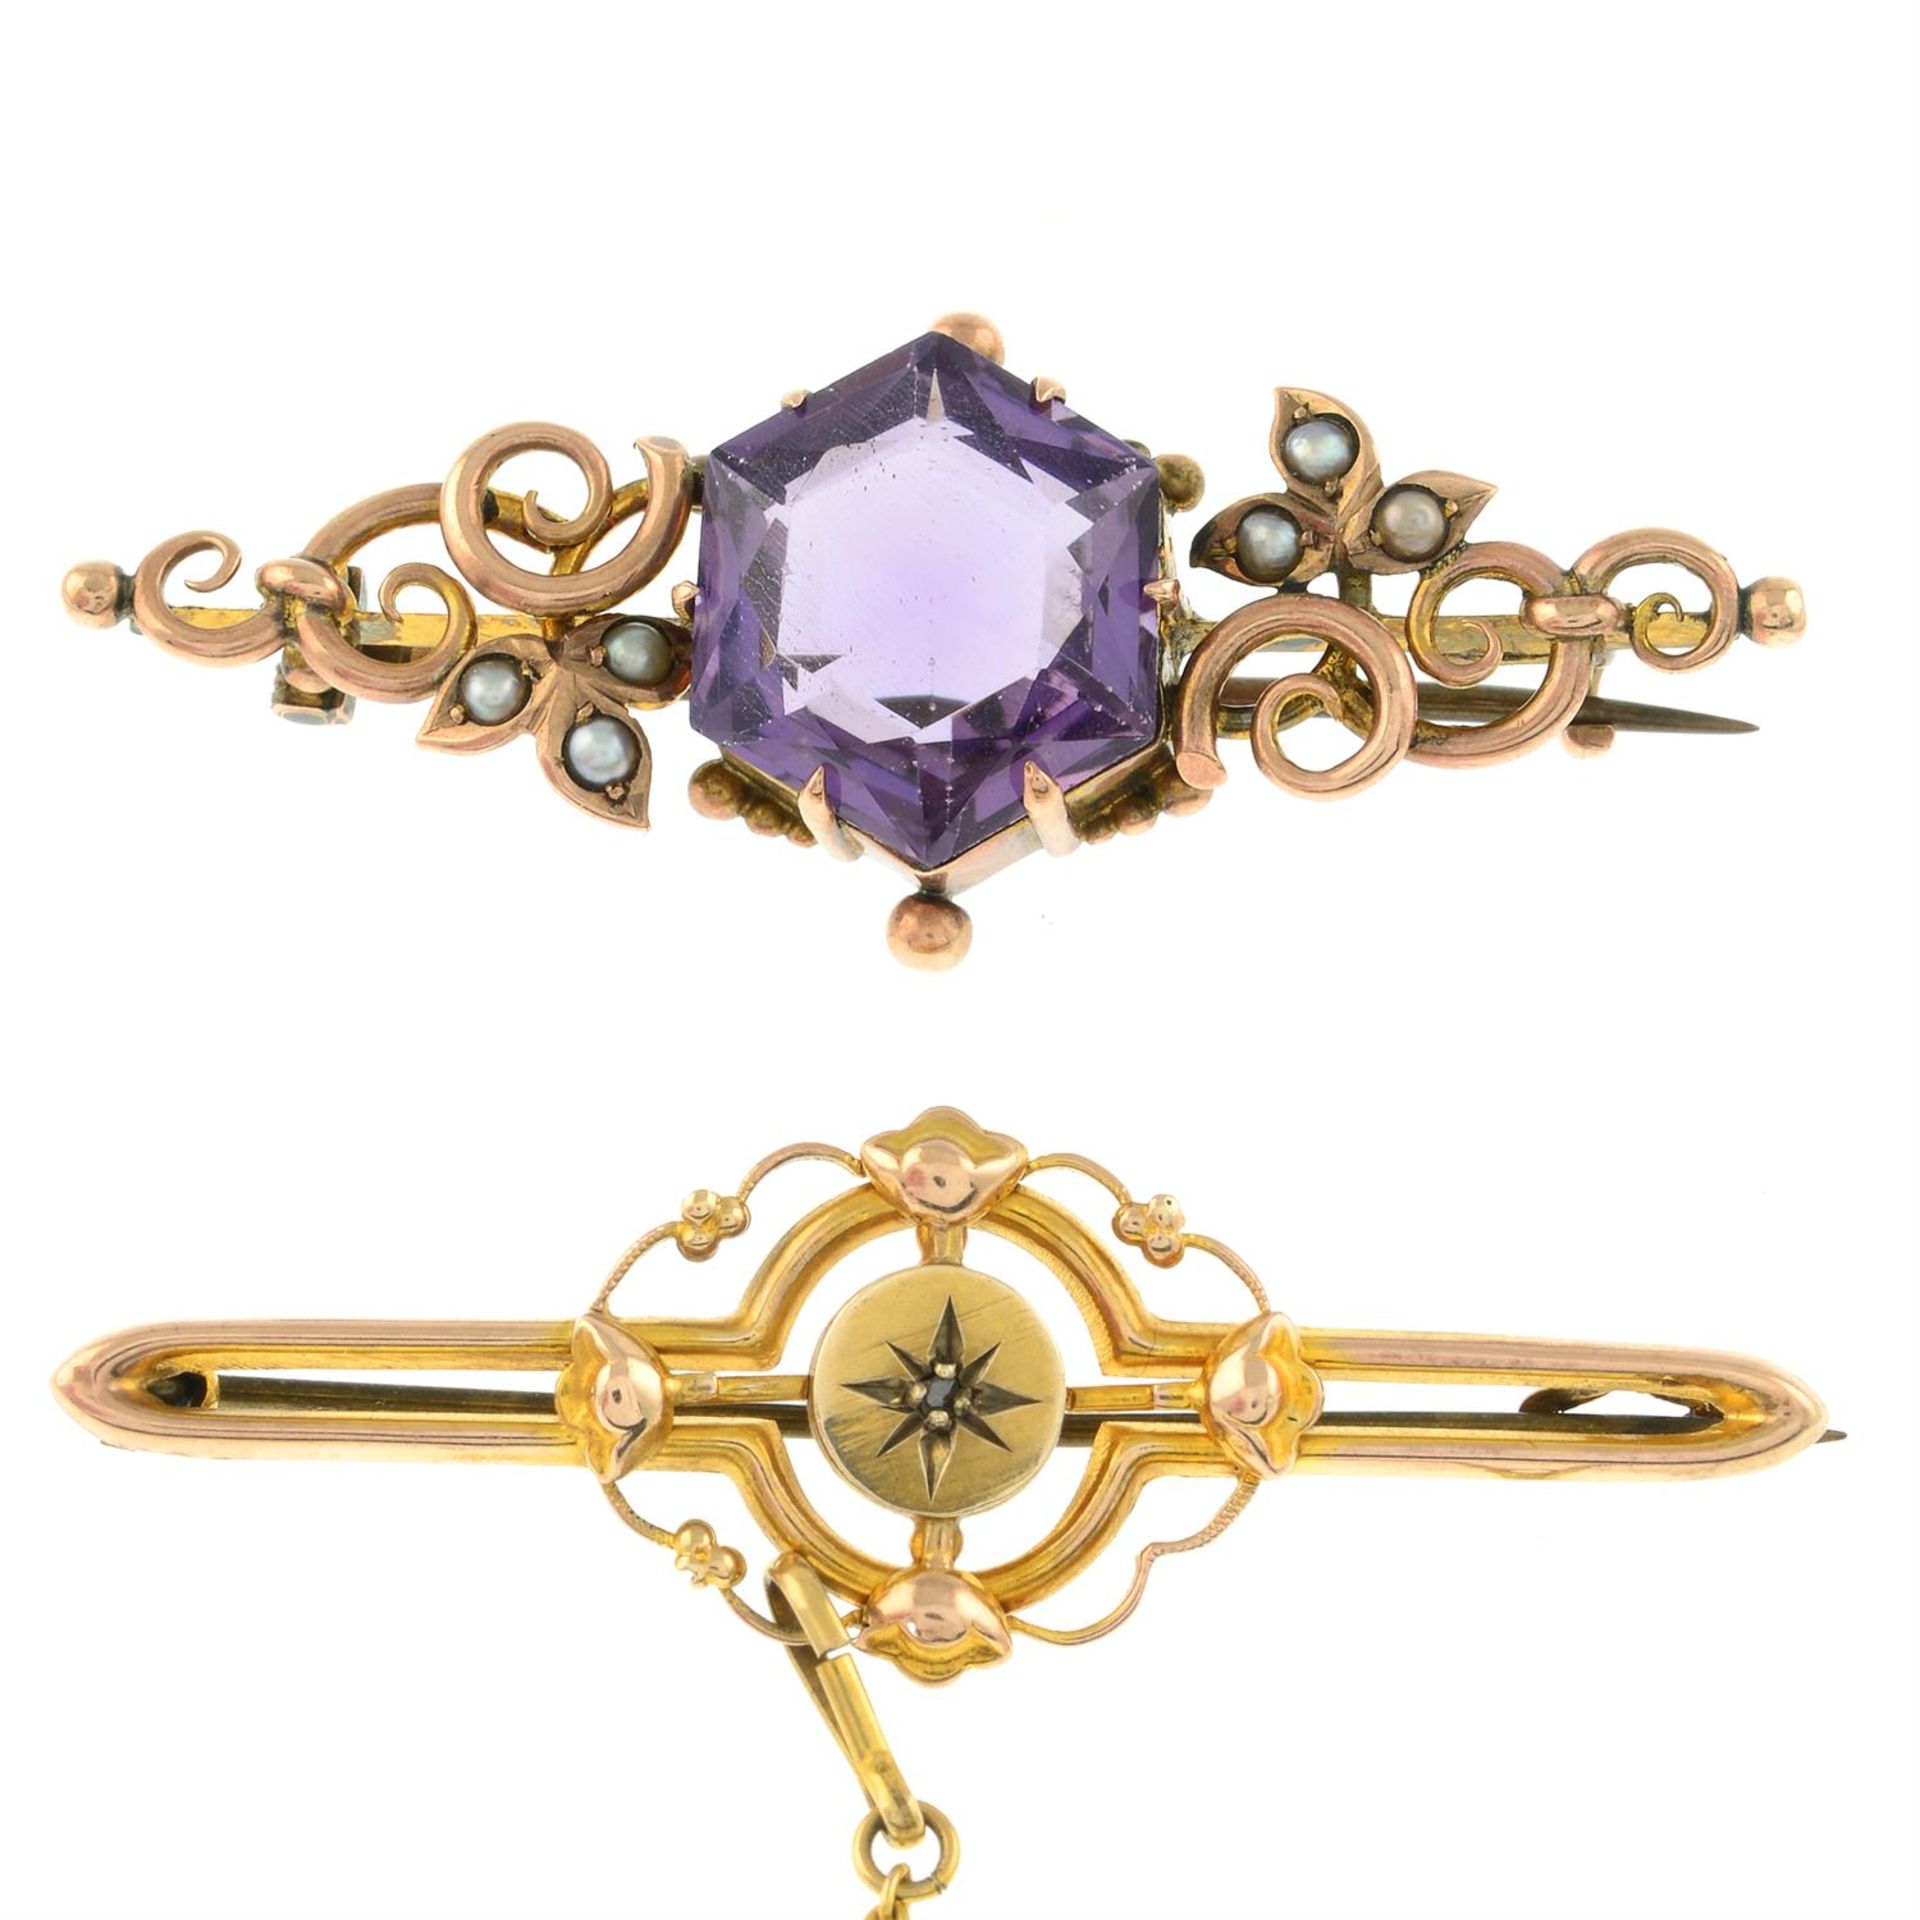 Two early 20th century 9ct gold gem-set bar brooches